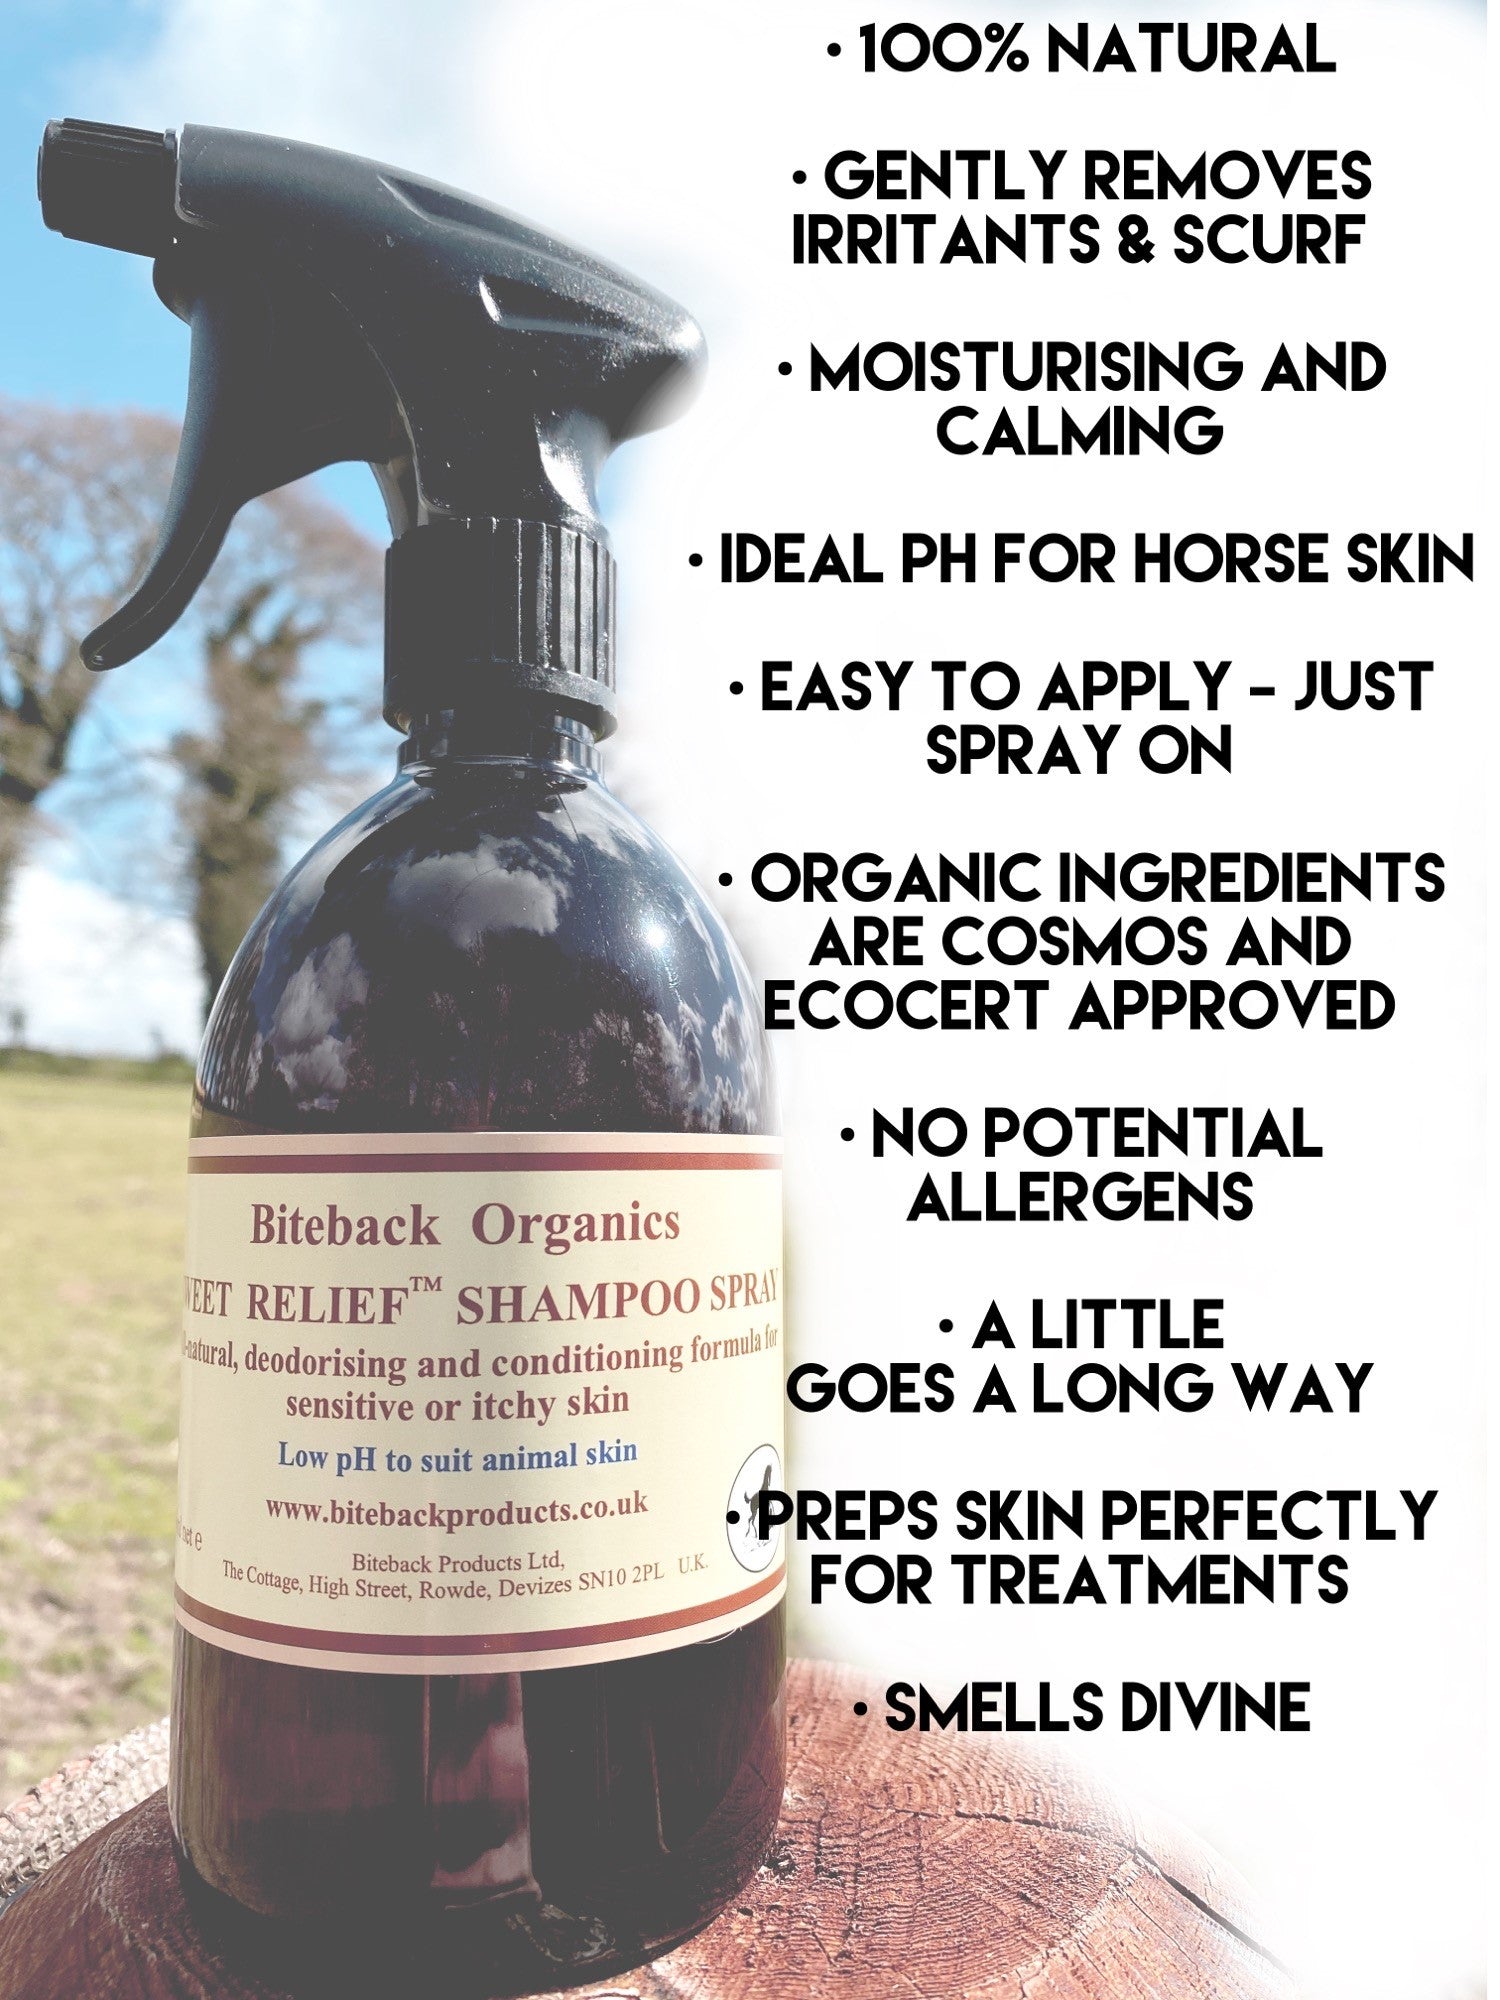 Benefits of Sweet Relief shampoo for horses with sweet itch